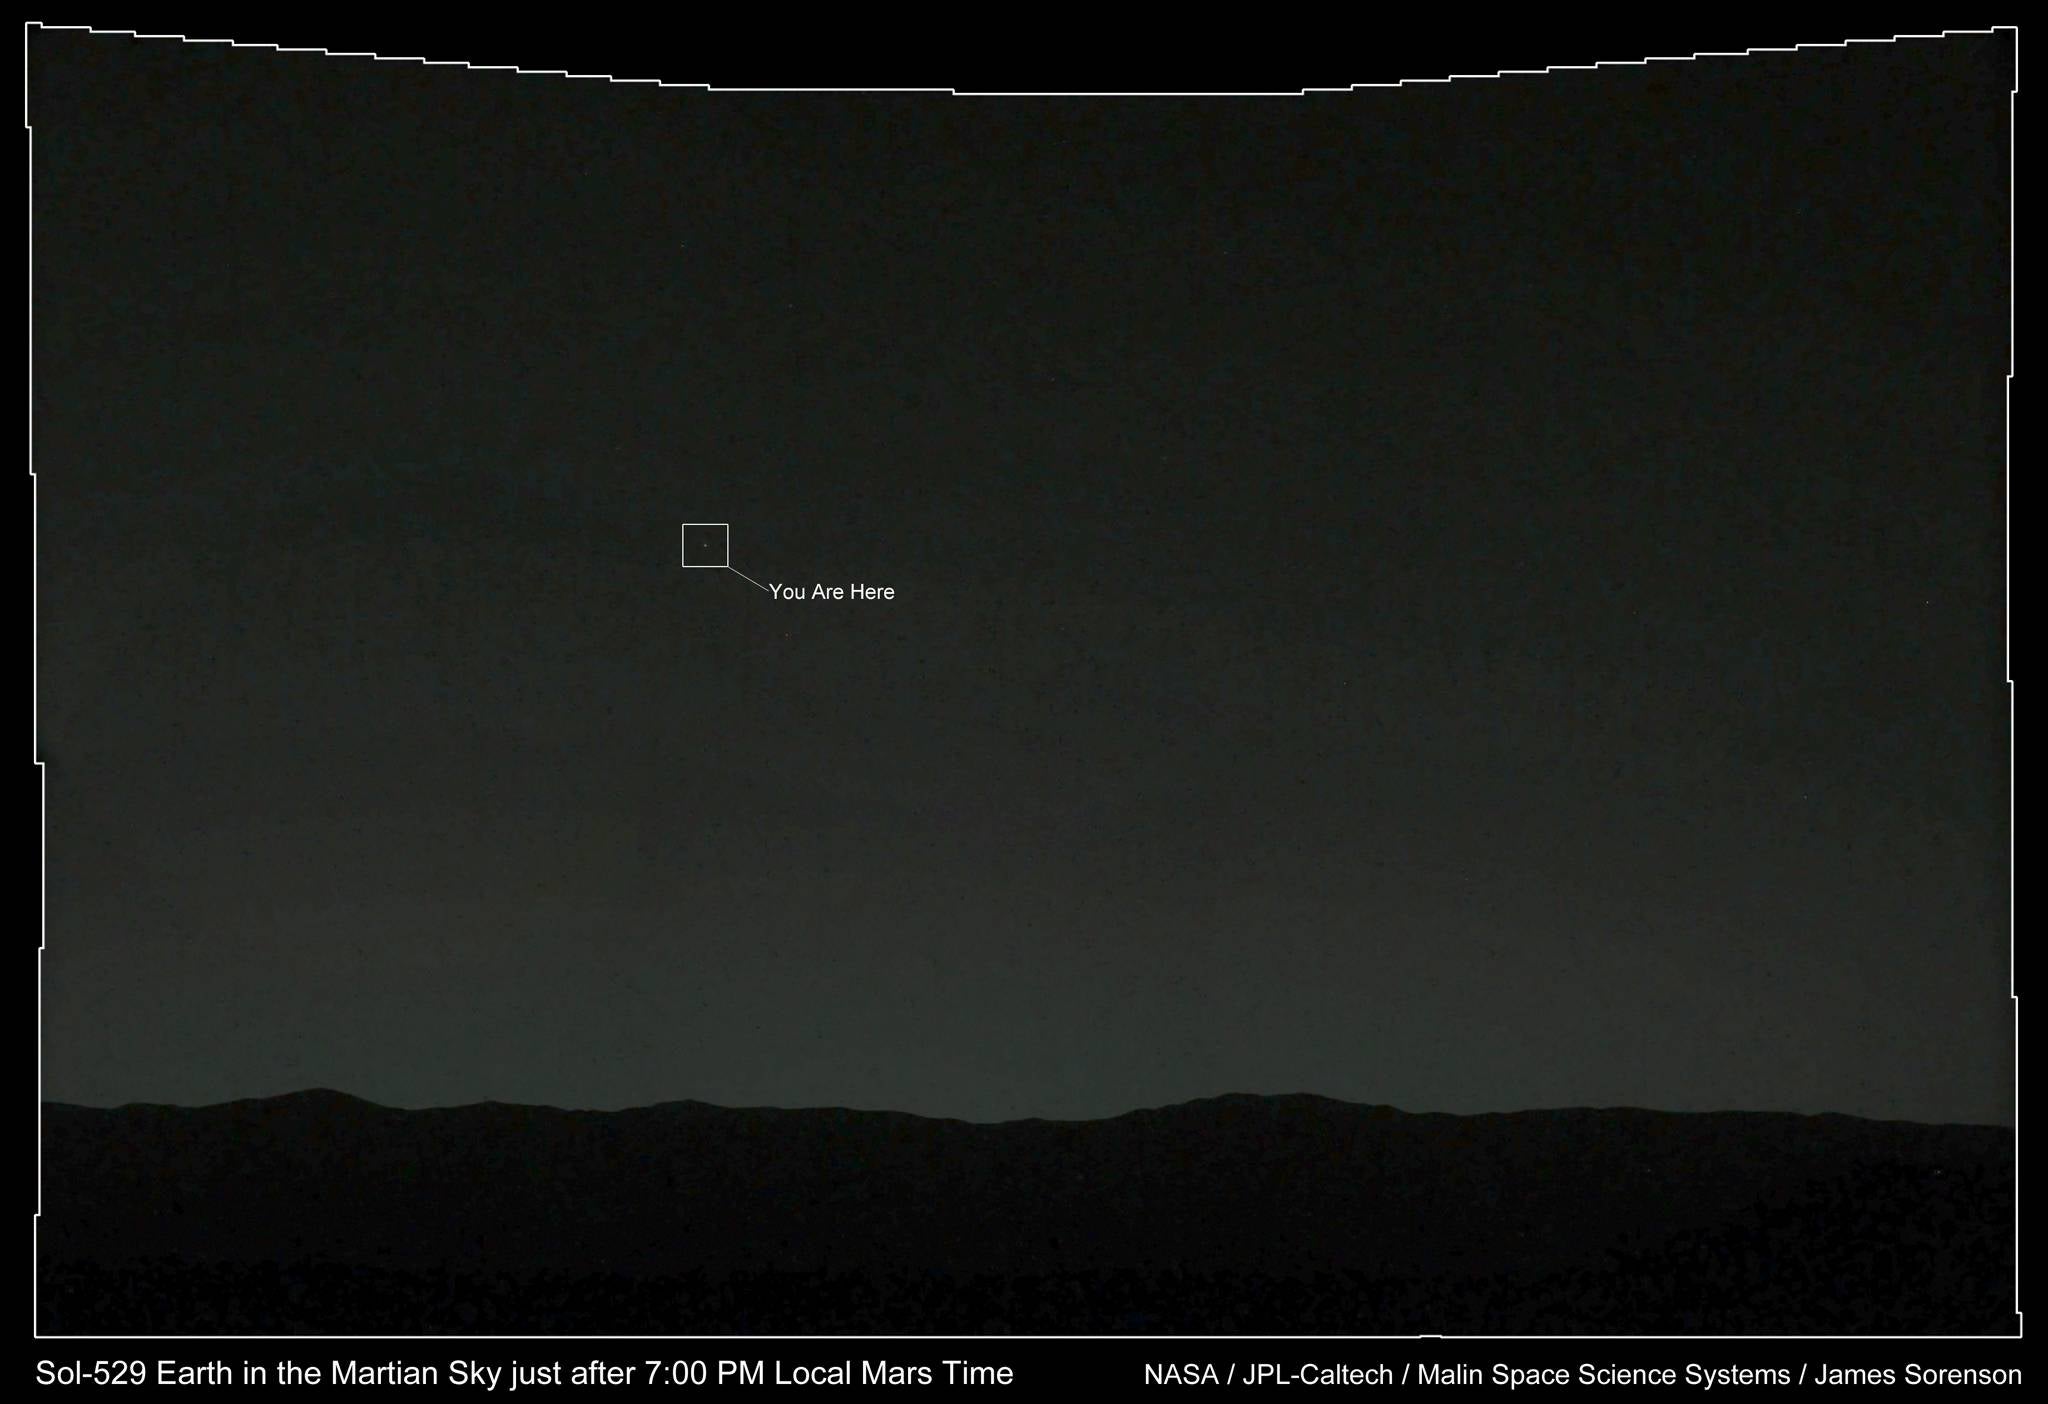 You are here: Earth appears like a 'bright evening star' from Mars